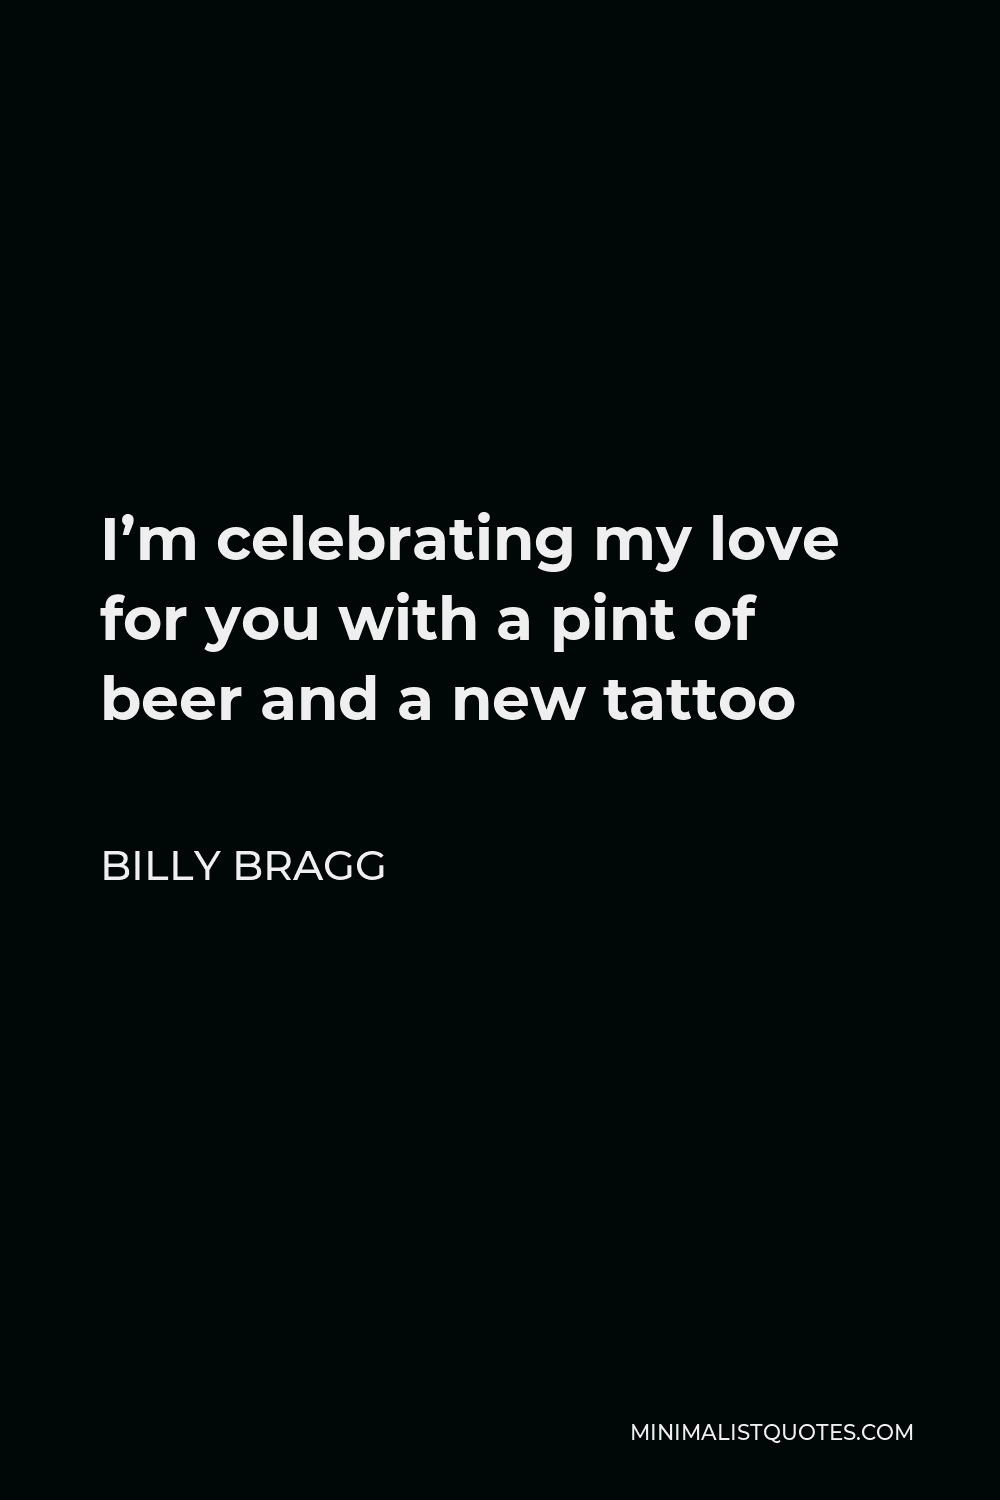 Billy Bragg Quote - I’m celebrating my love for you with a pint of beer and a new tattoo